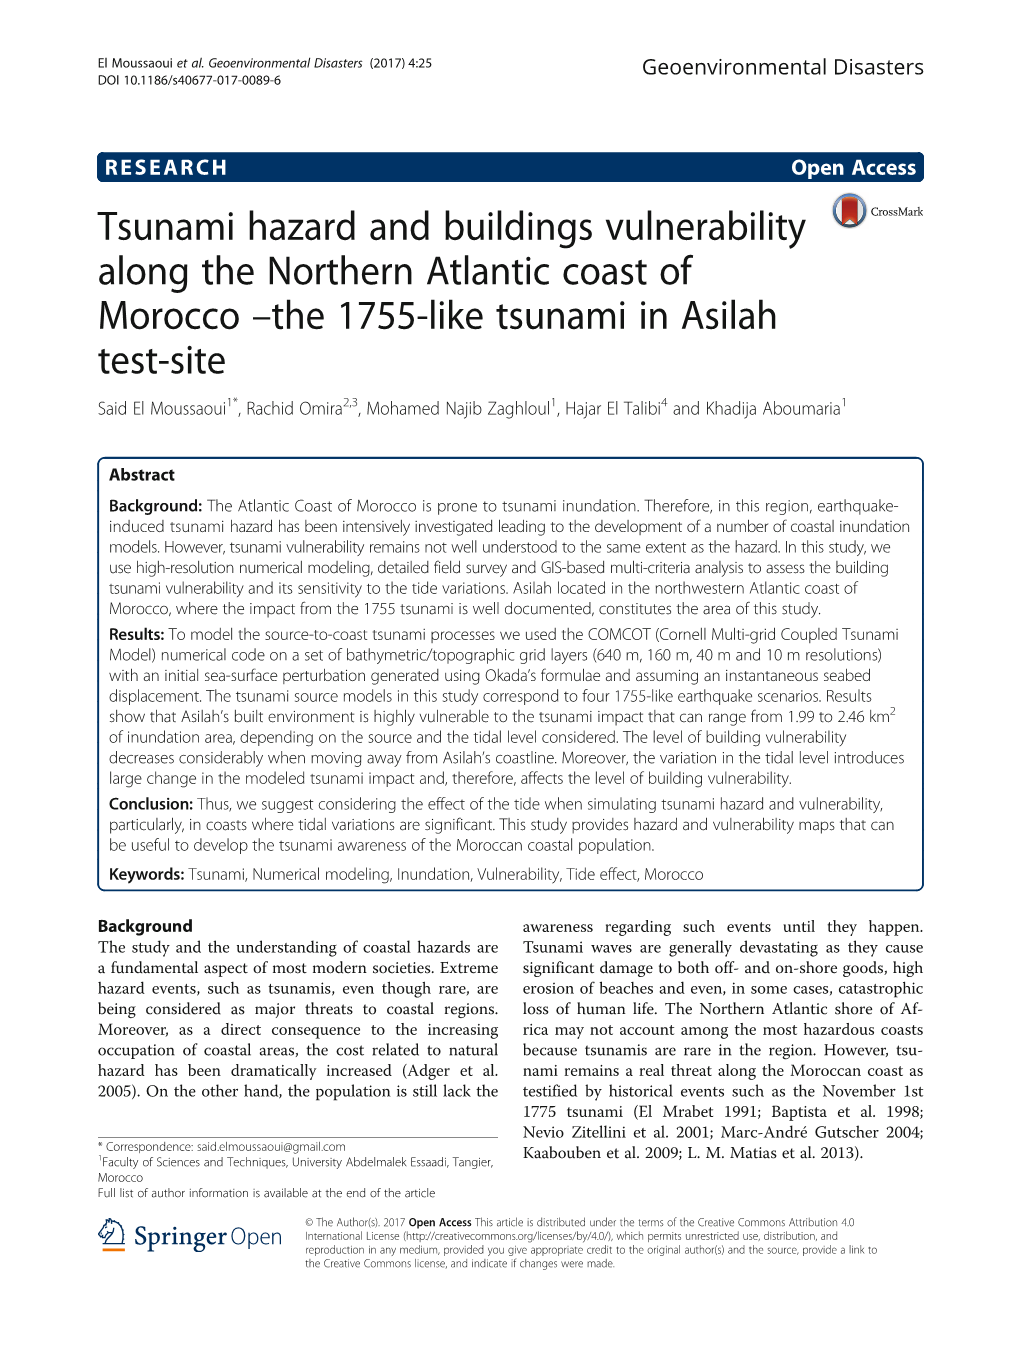 Tsunami Hazard and Buildings Vulnerability Along the Northern